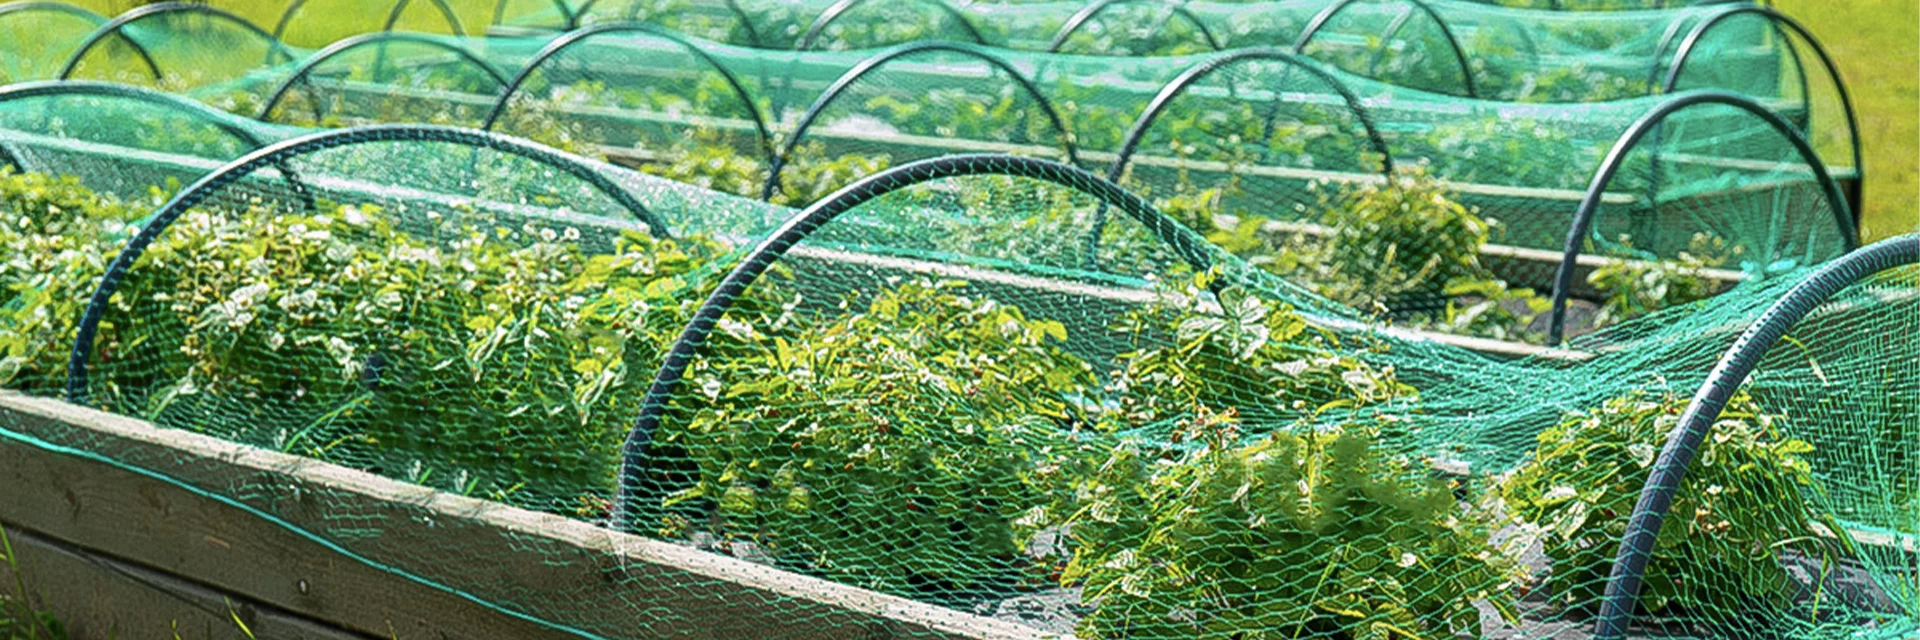 You are currently viewing How to Build a Great Garden Netting Frame For Your Garden Raised Beds